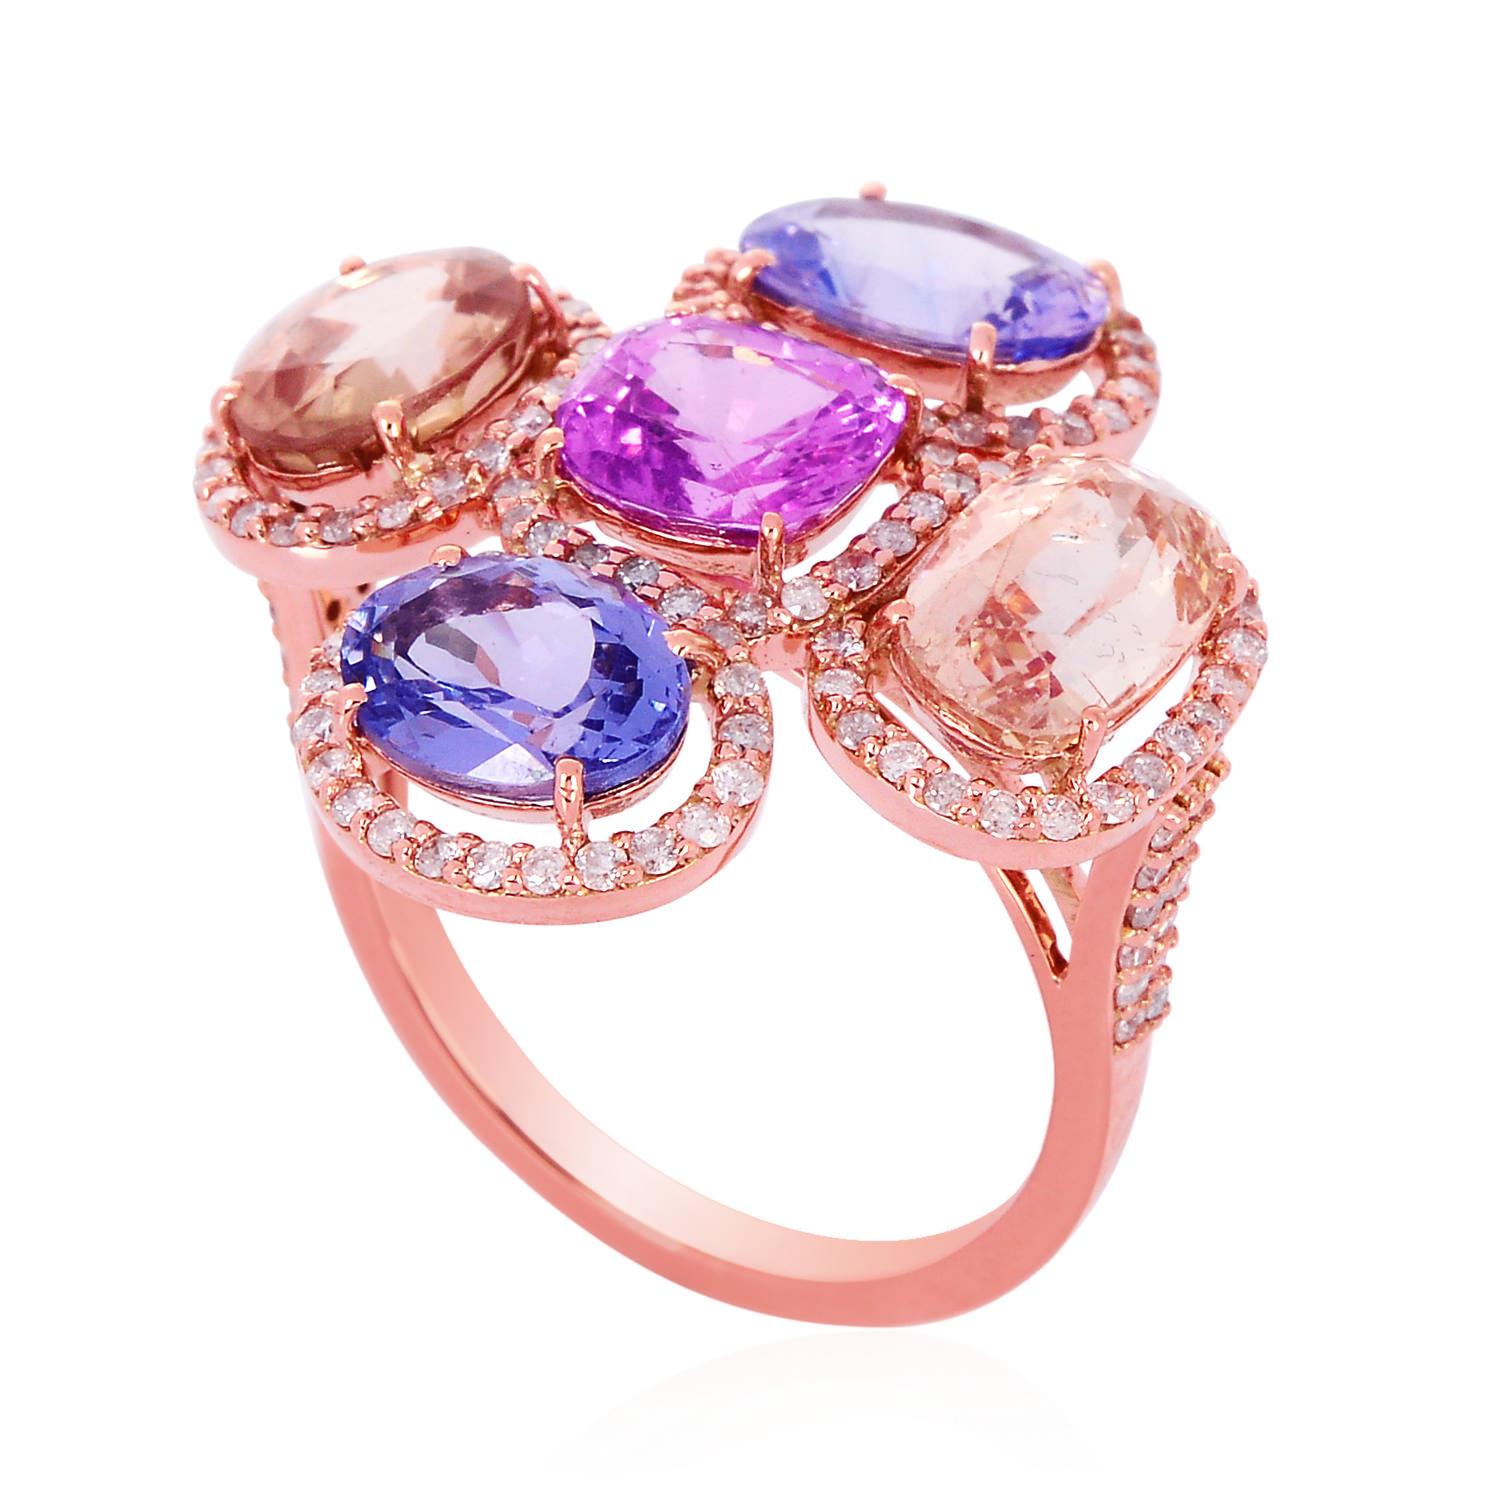 Rose Cut Oval Shaped Multi-Color Sapphire Ring in 18k Rose Gold Surrounded by Diamonds For Sale